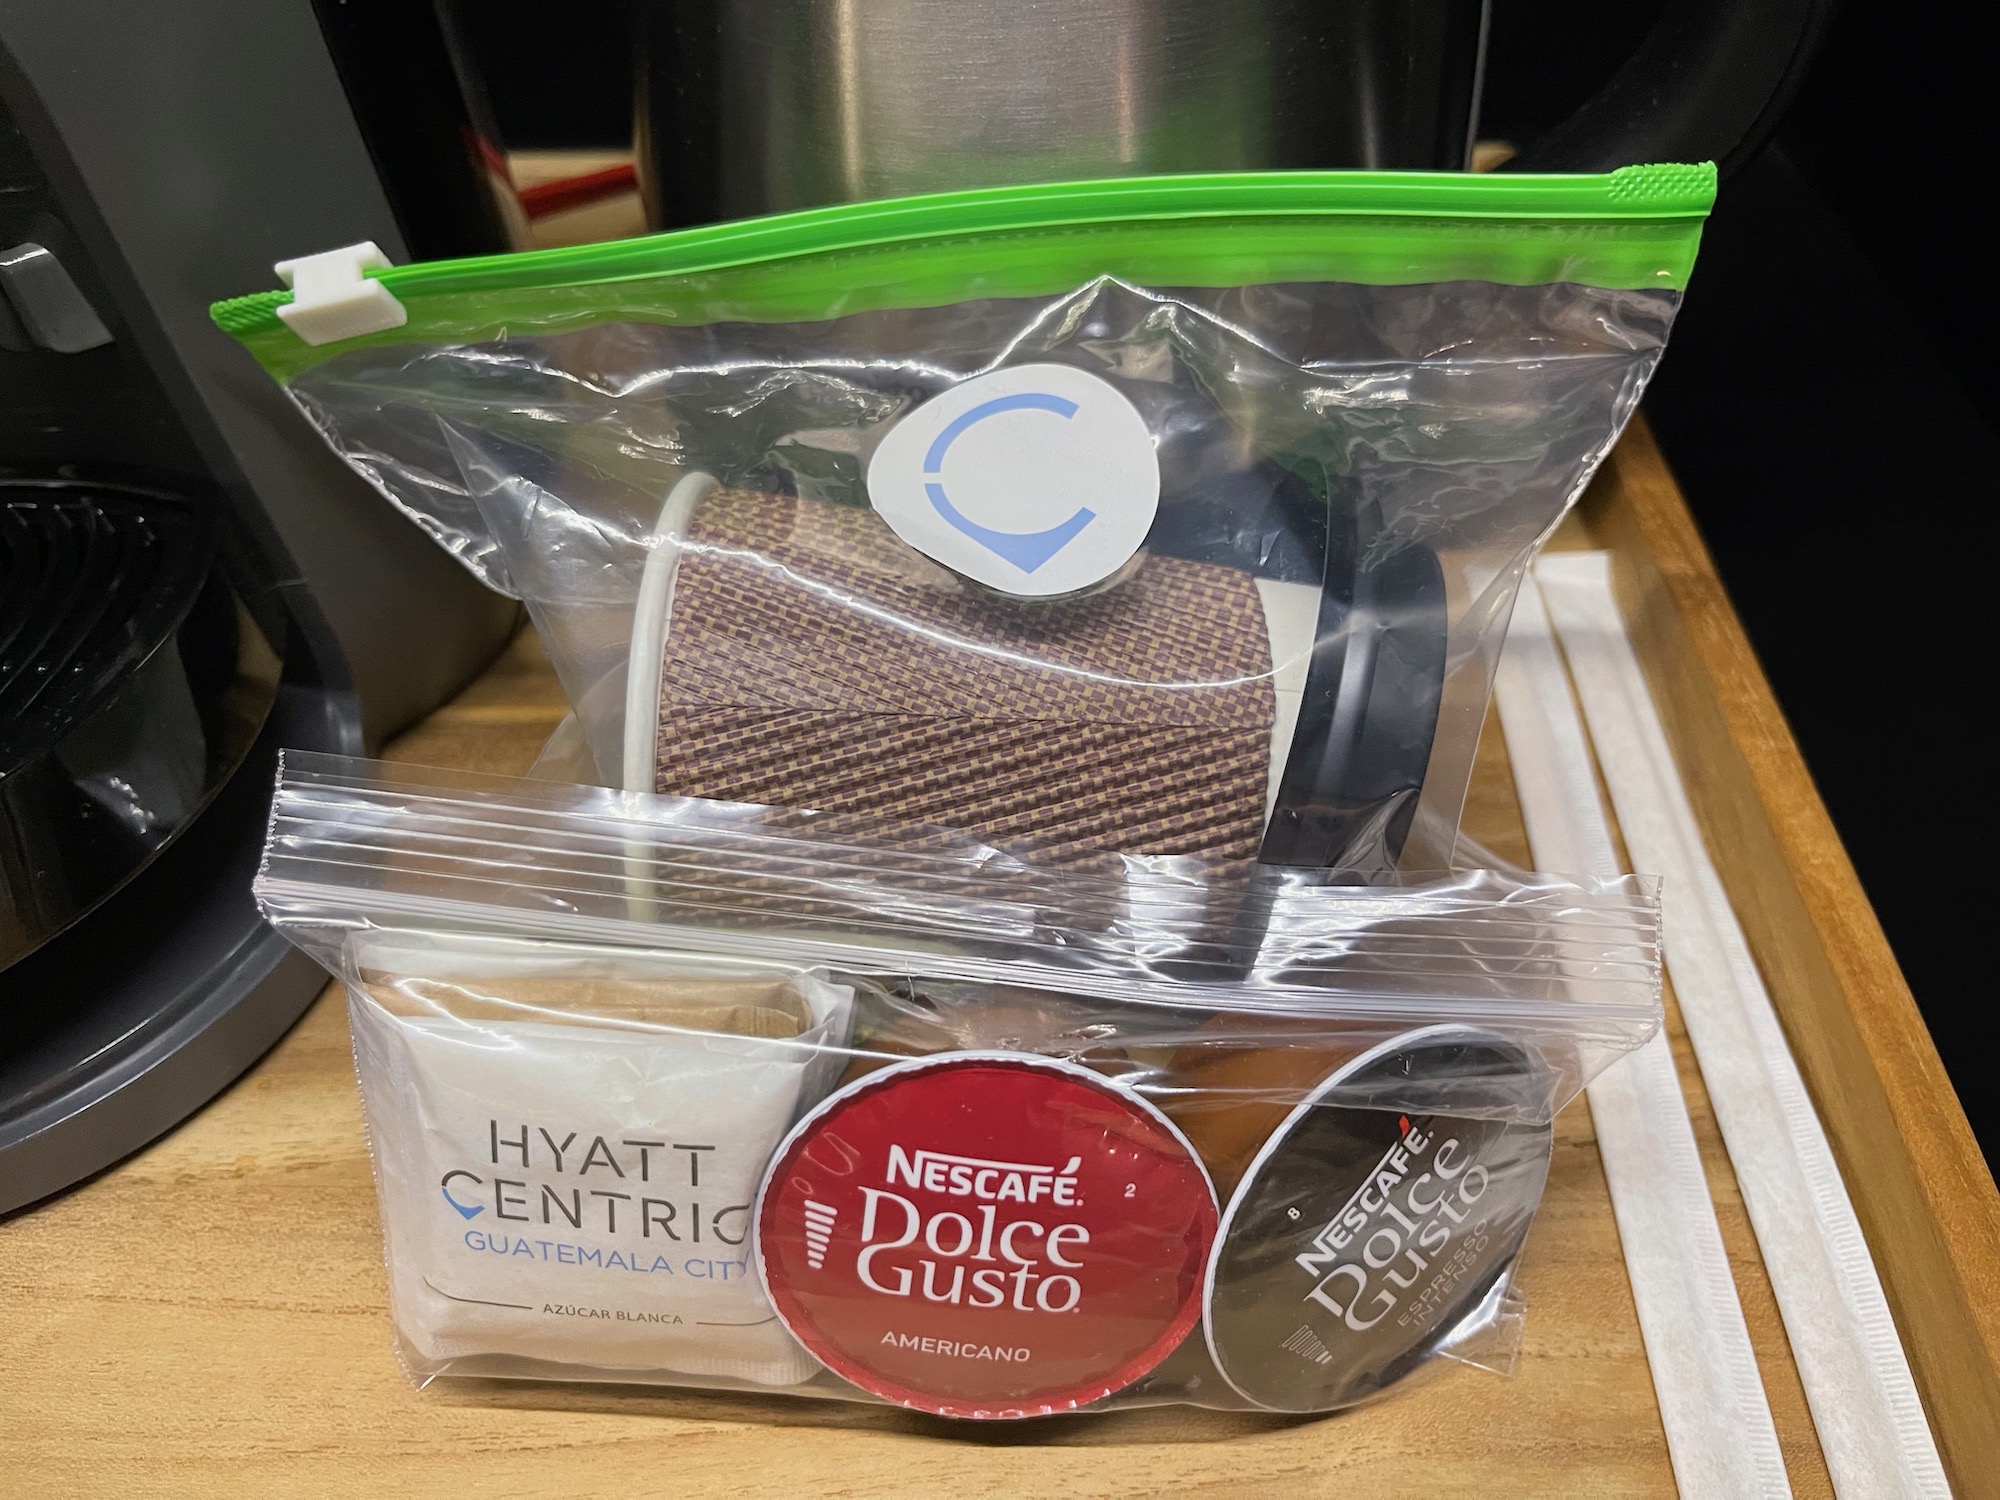 a bag of coffee cups and other items